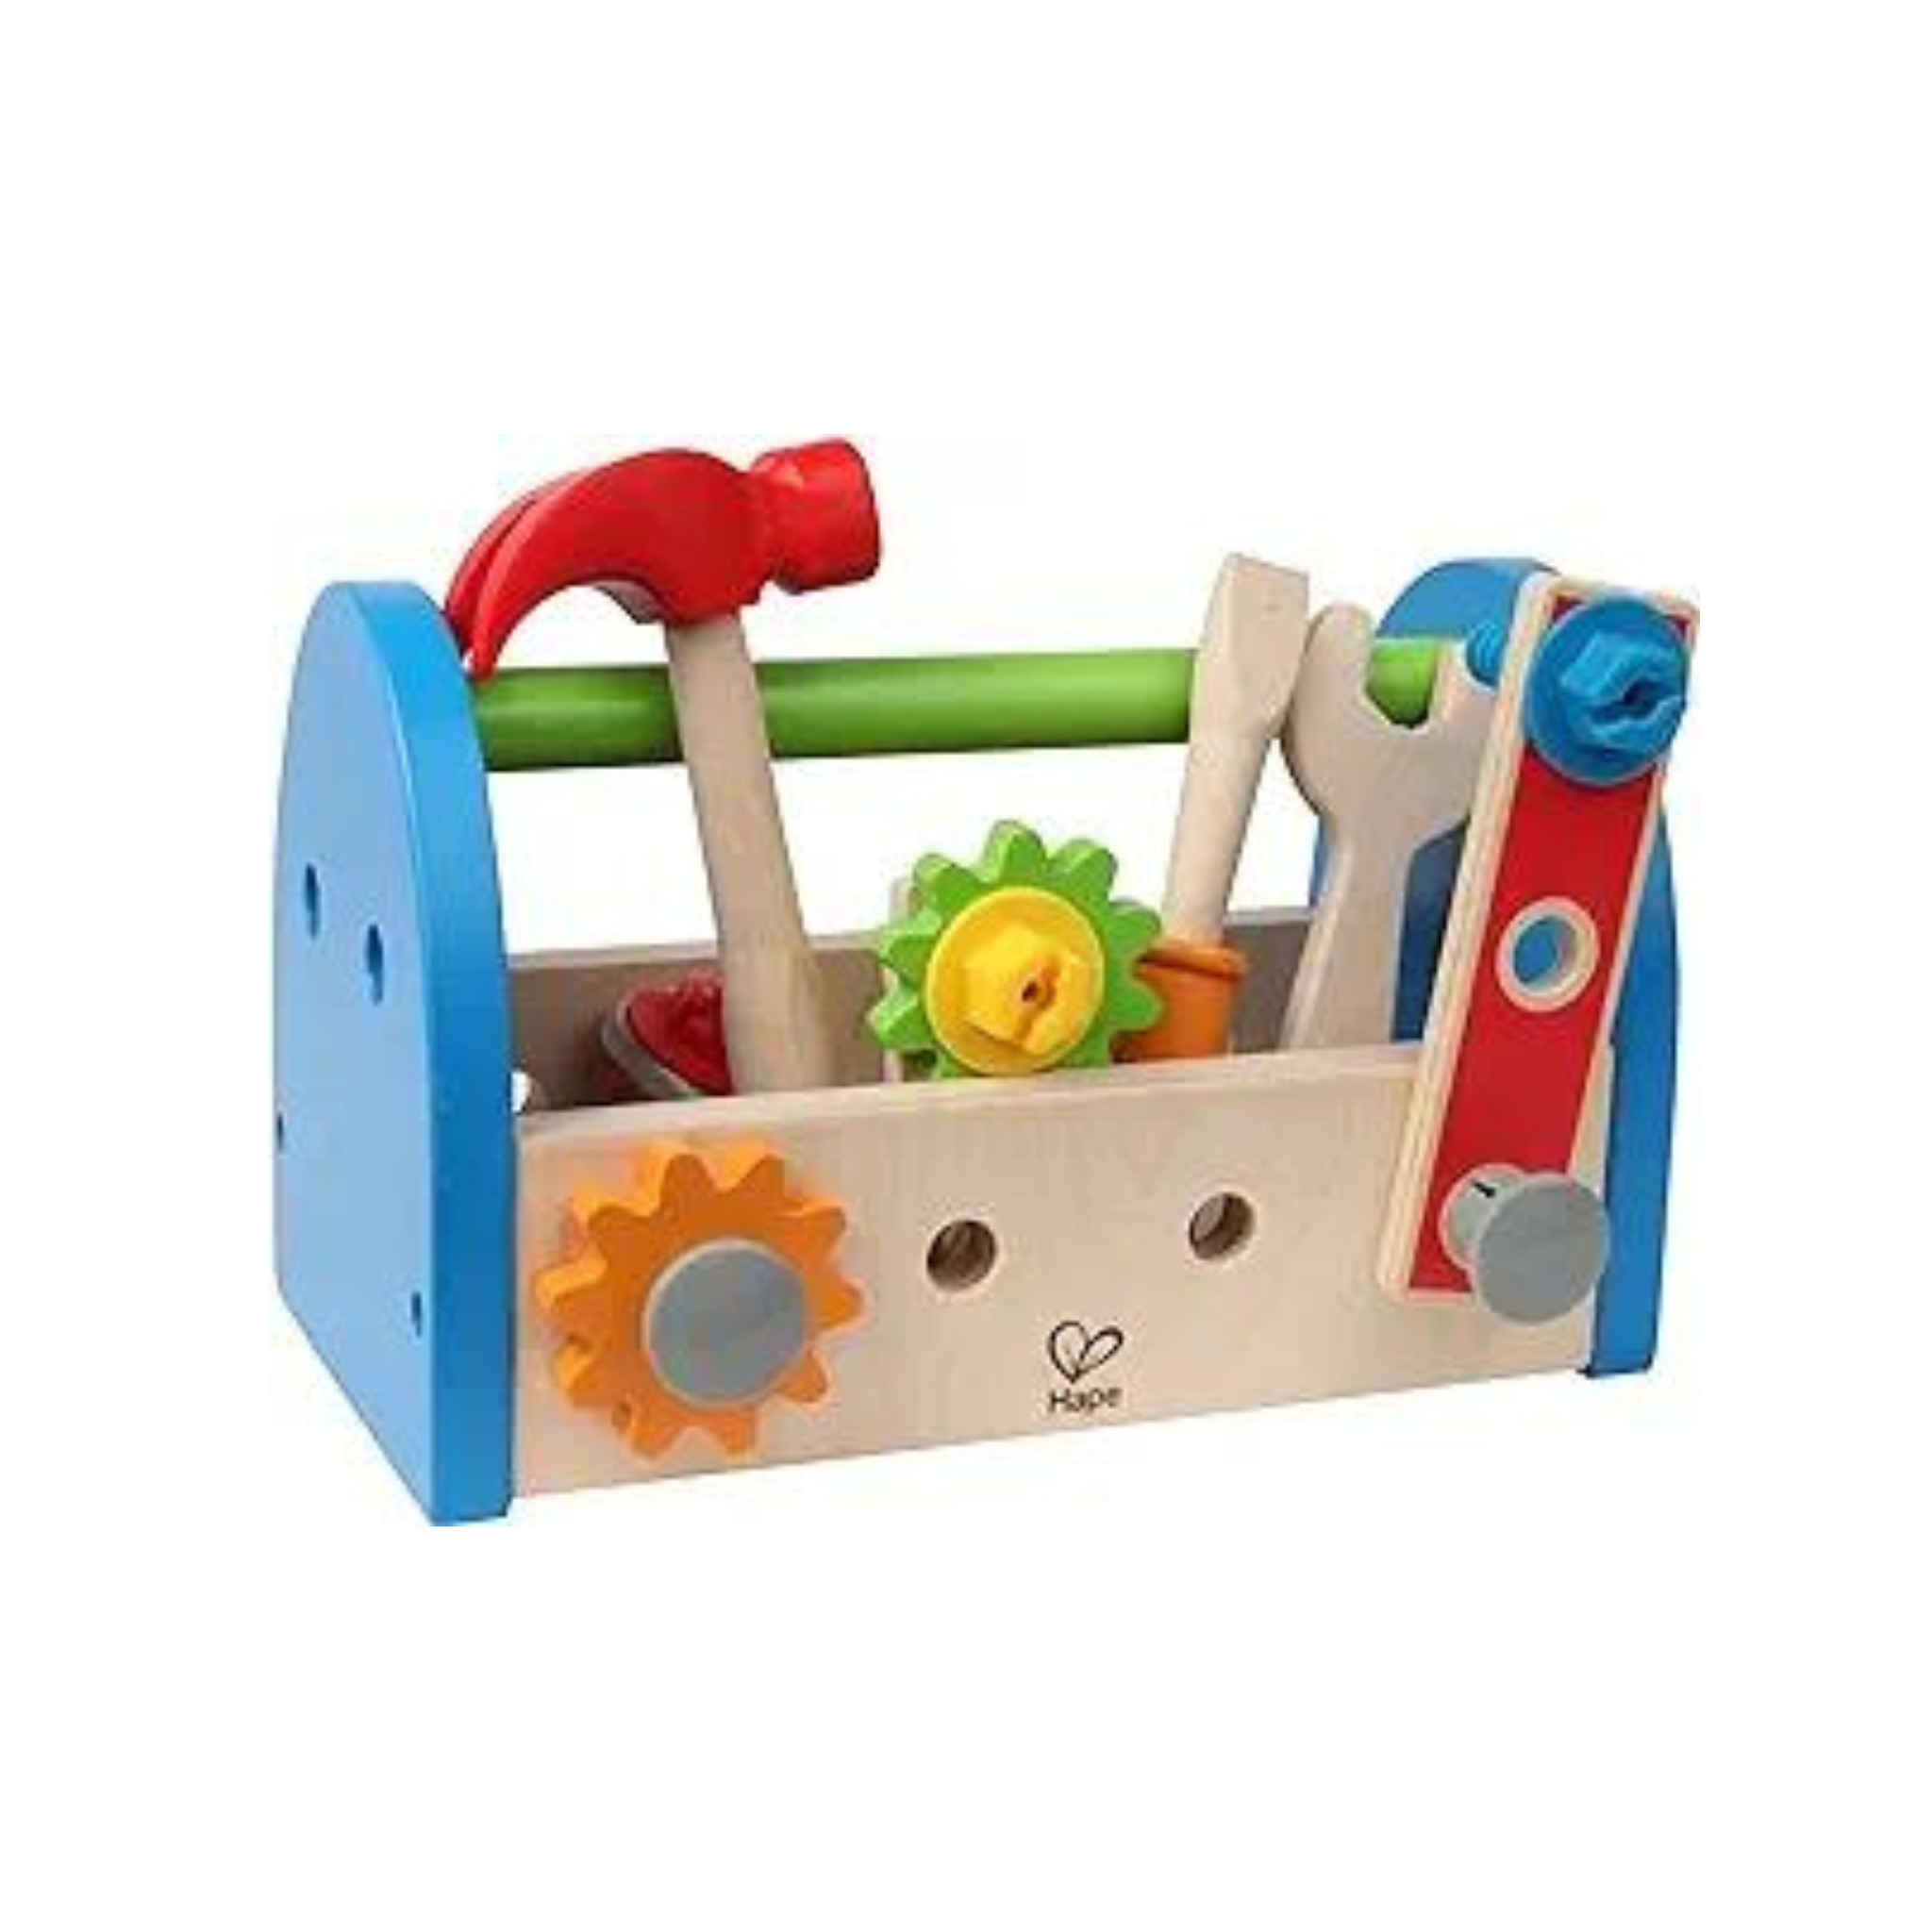 Hape Fix It Kid’s Wooden Tool Box And Accessory Play Set